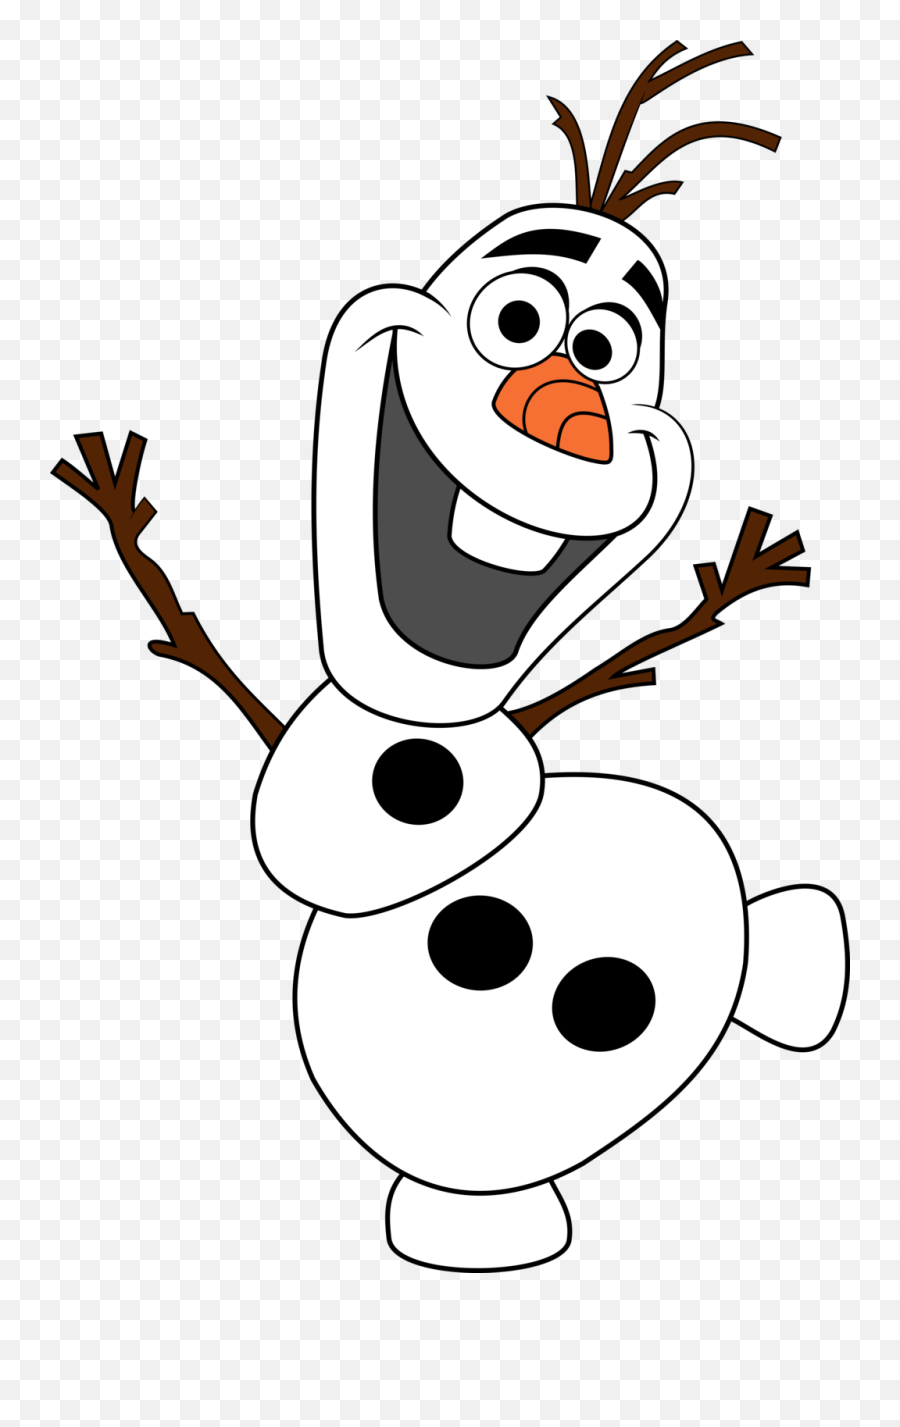 Olaf Png Background Image - Olaf Frozen Clipart,Olaf Png